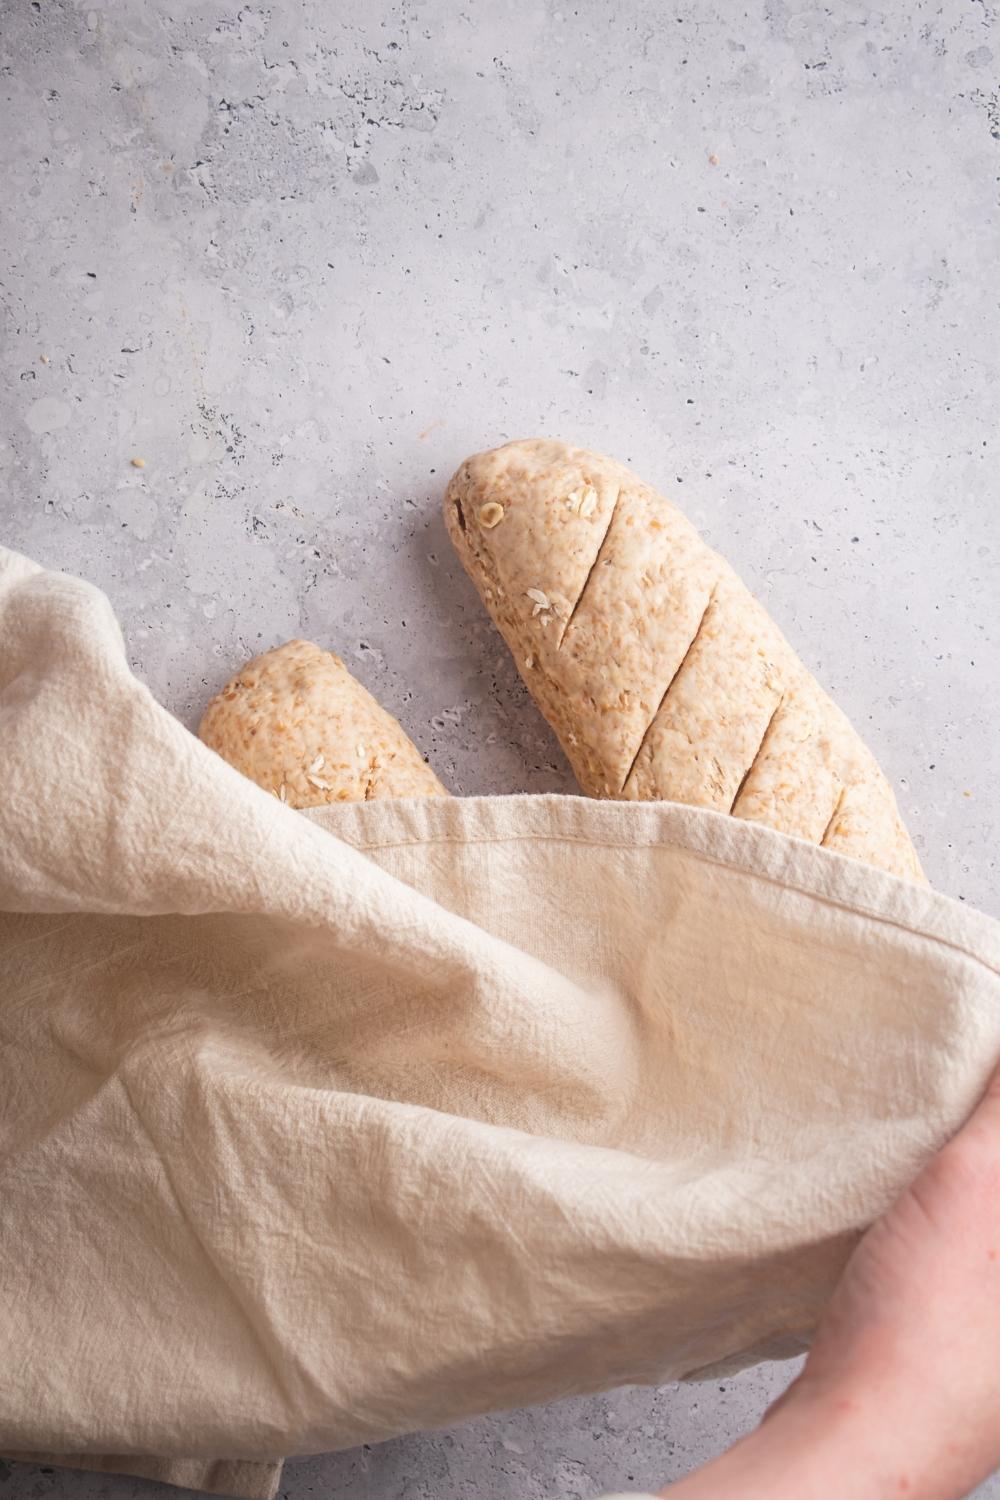 To unbaked bread those made in two loaves with slits on the top. A hand covers both of the uncooked loaves with a kitchen towel.